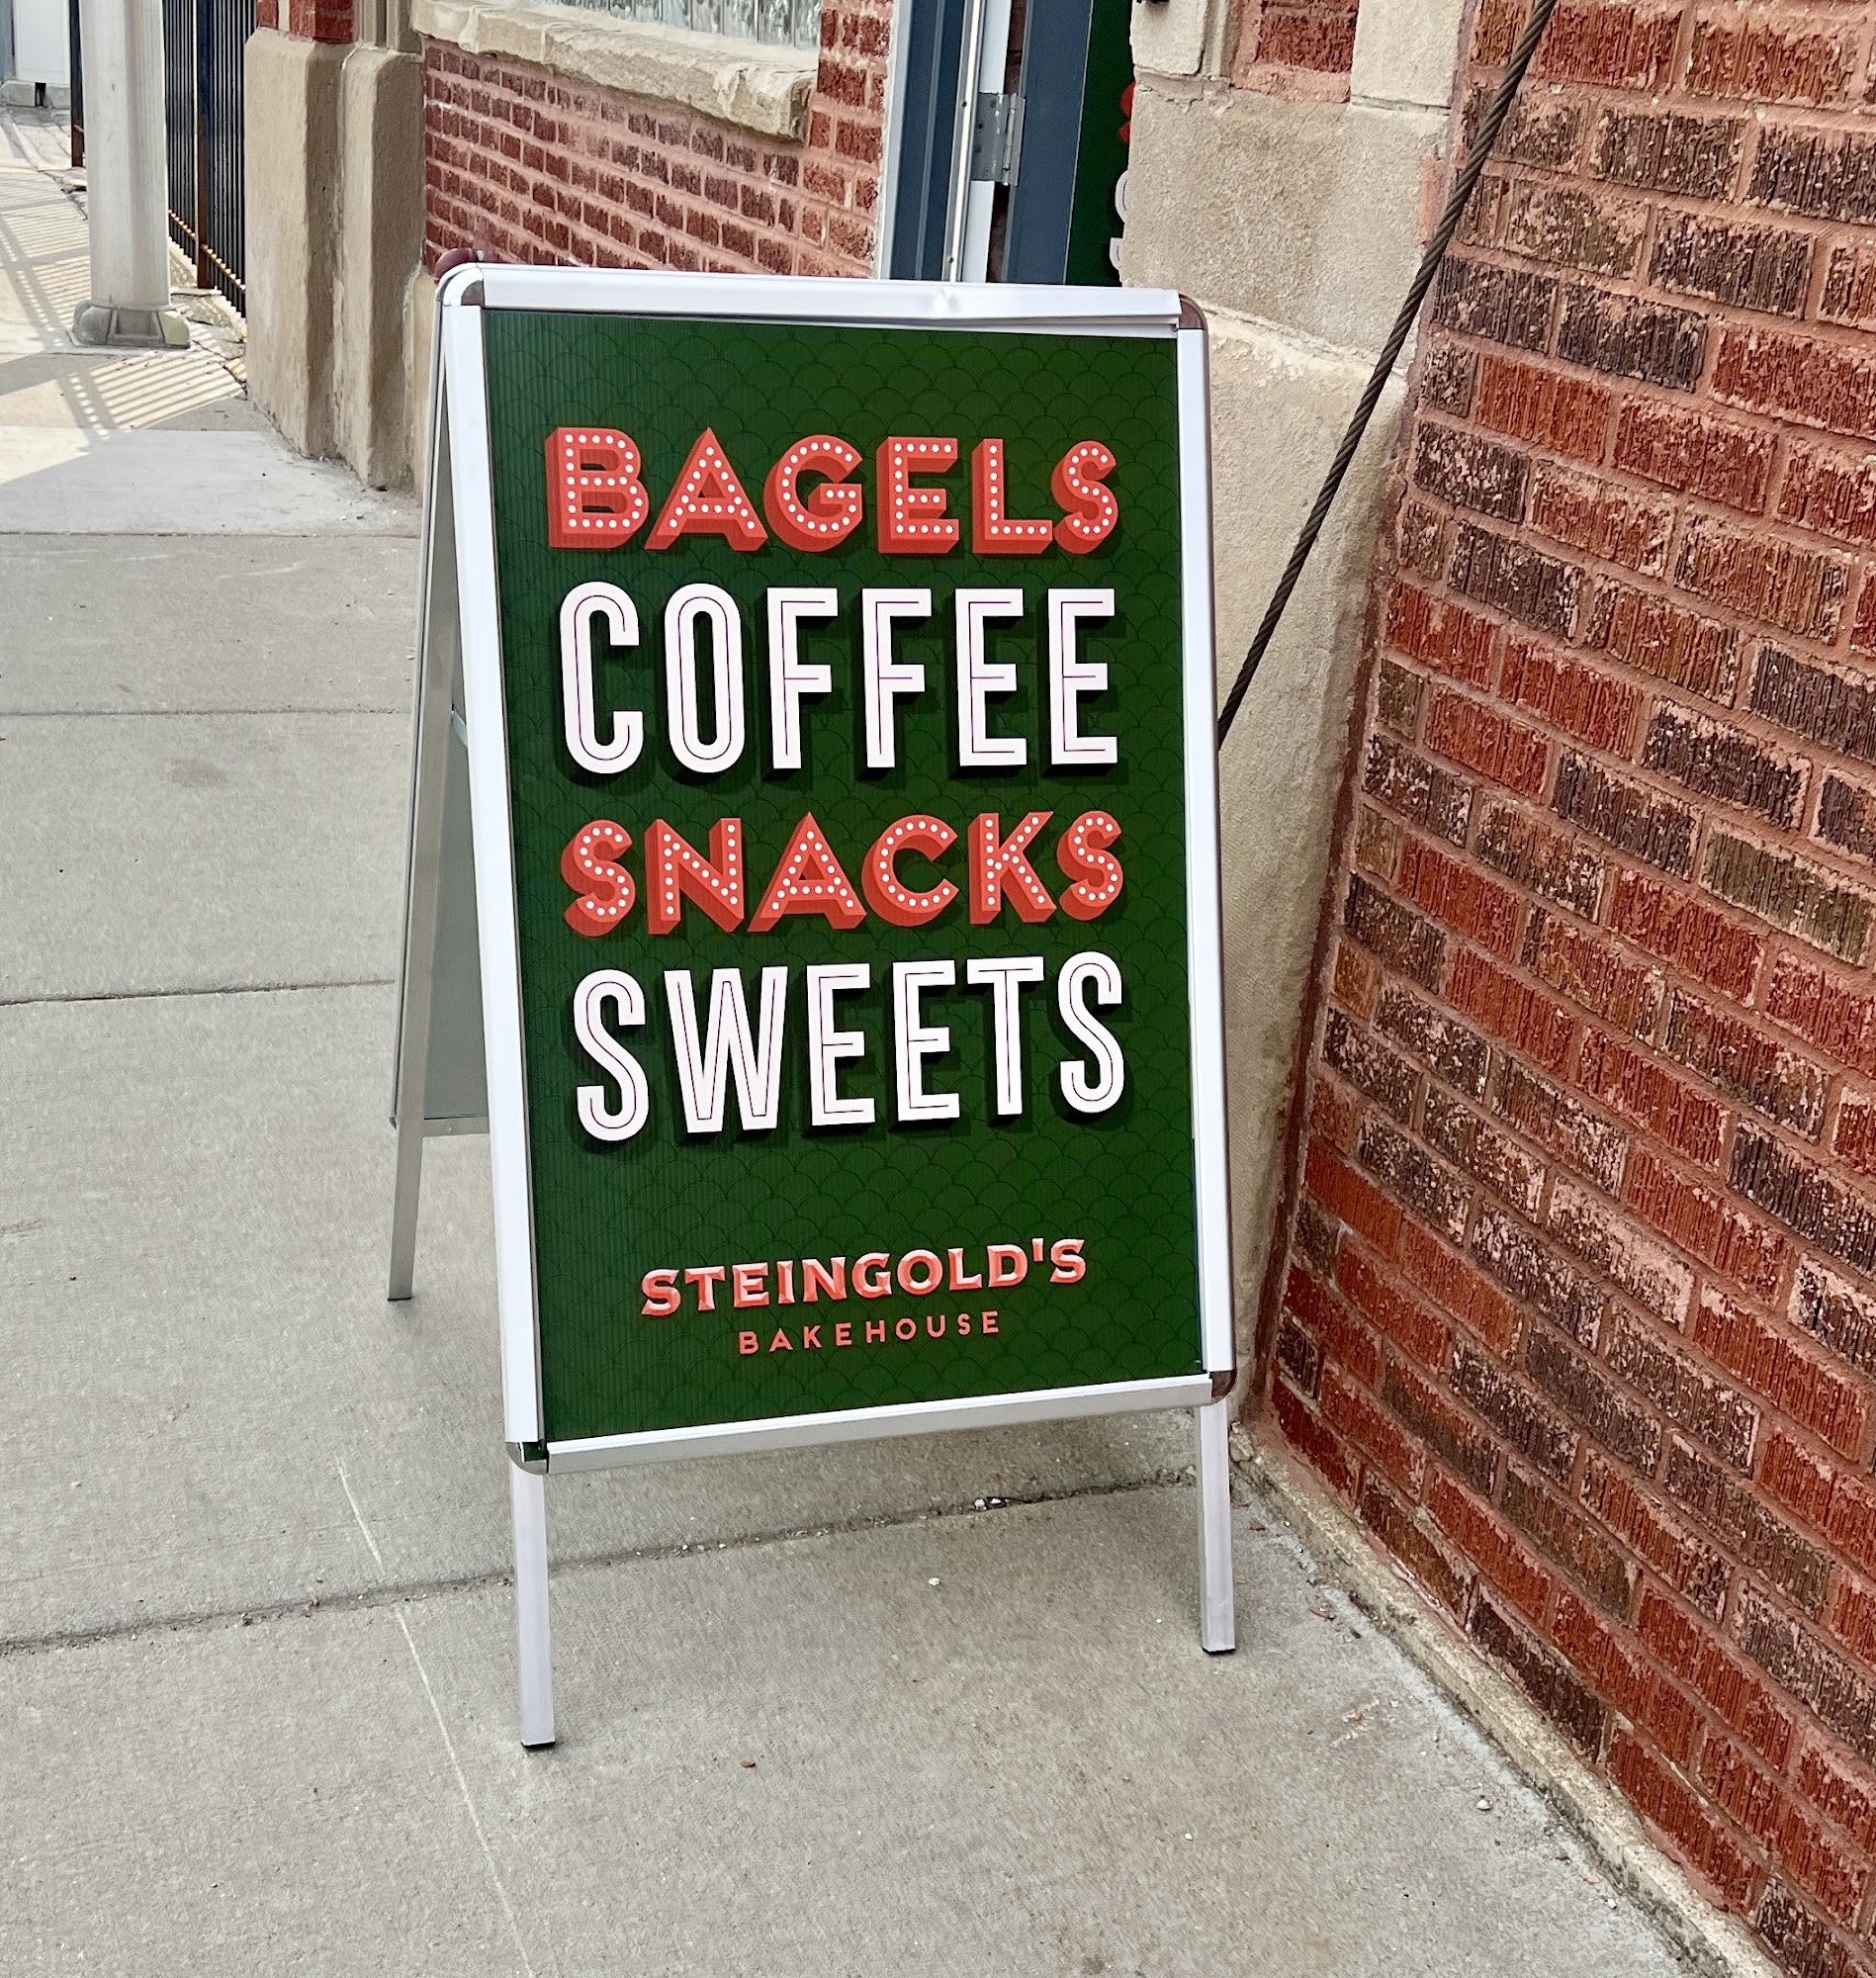 Steingold's Bakehouse 2939 W Grand Ave, Chicago, IL 60622